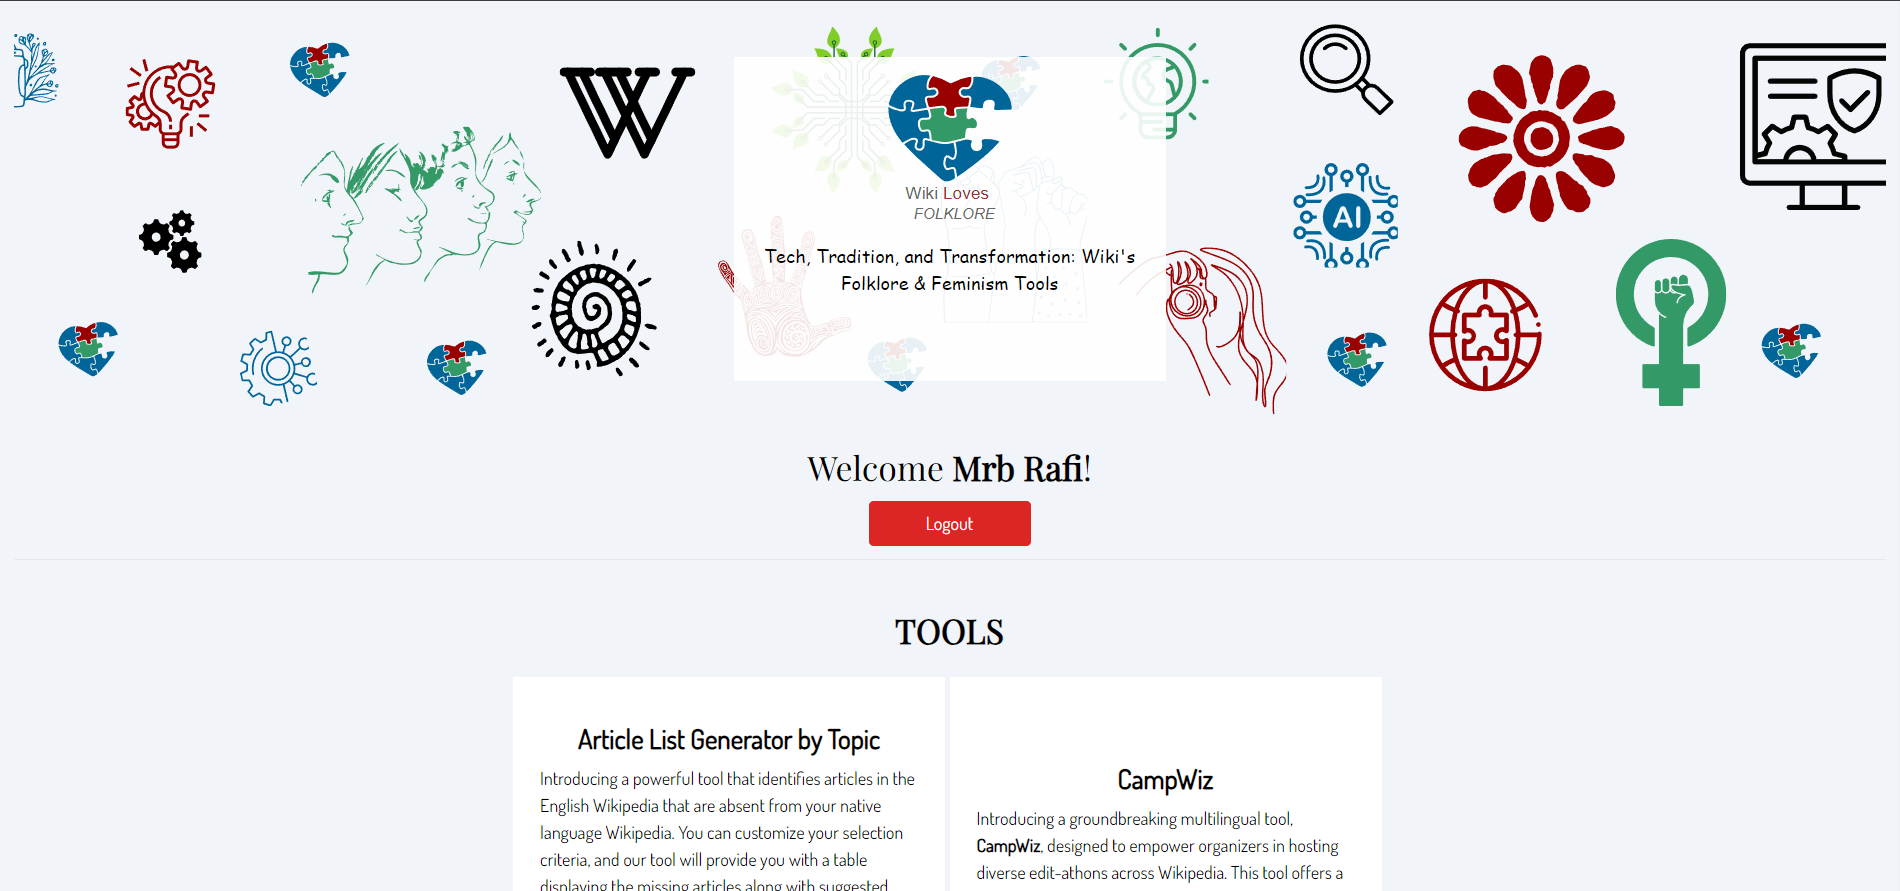 The homepage of Feminism and Folklore toolkit